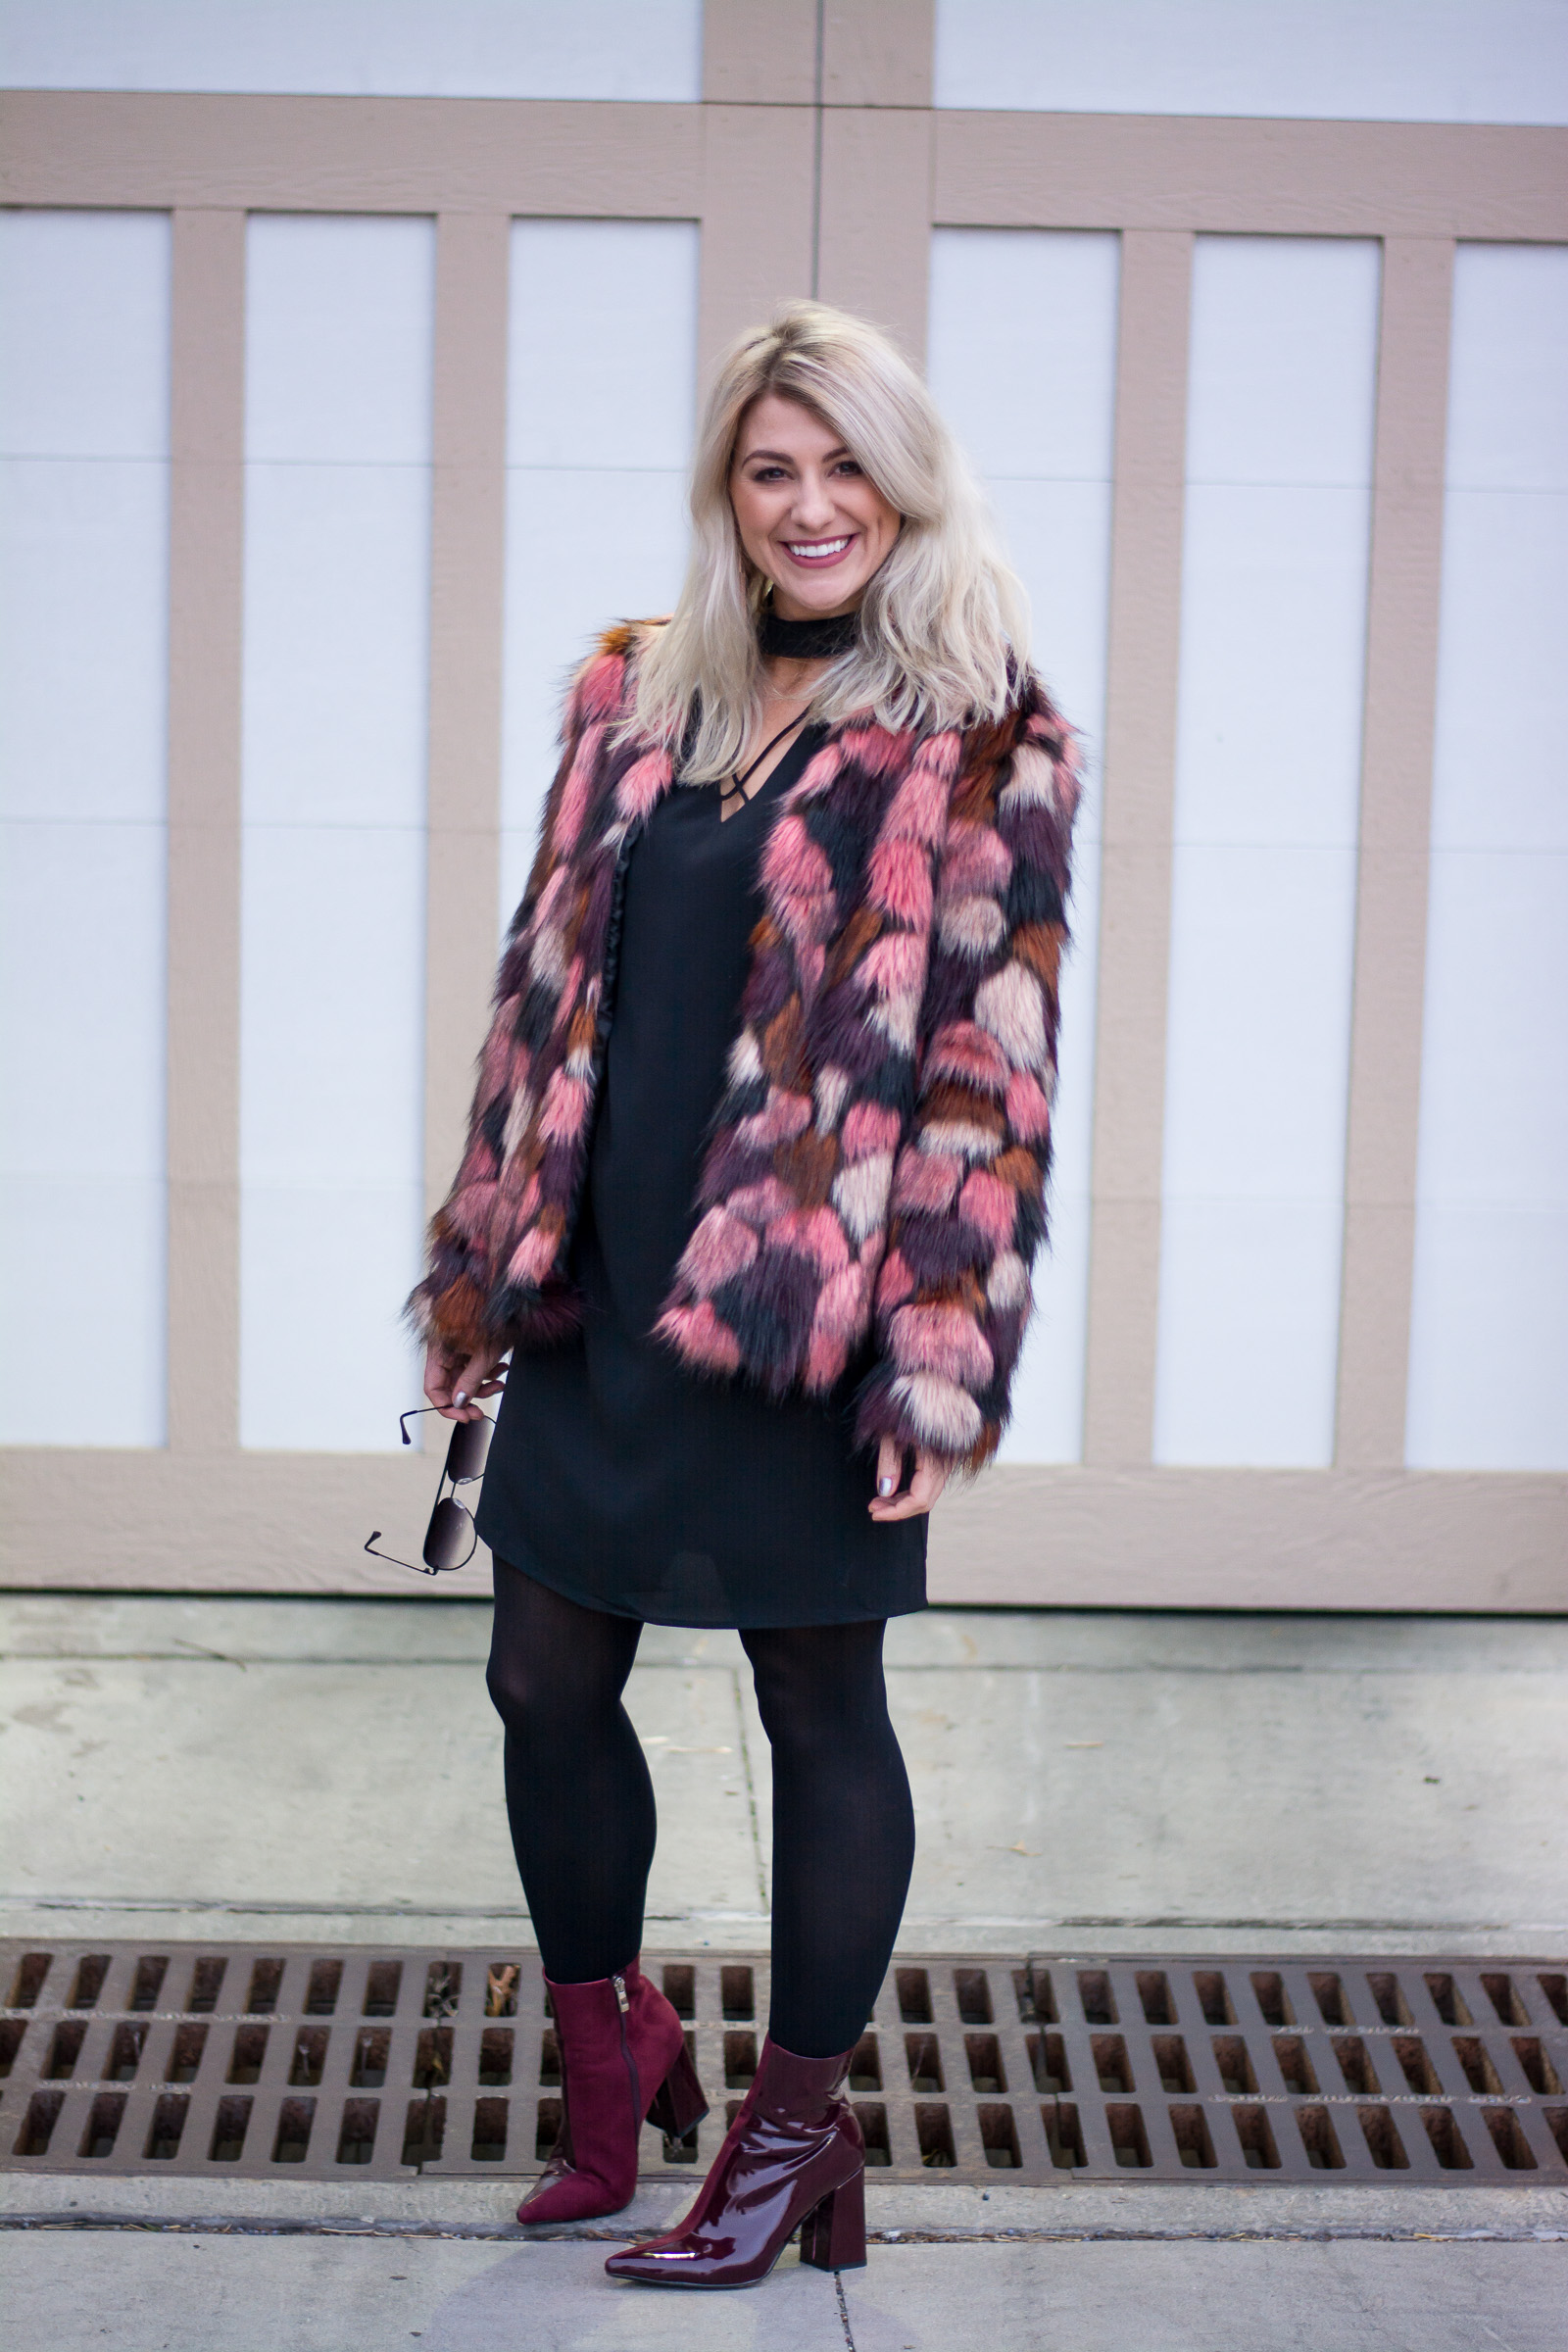 Dressing Up in Faux Fur for Valentine's Day. | Ashley from LSR